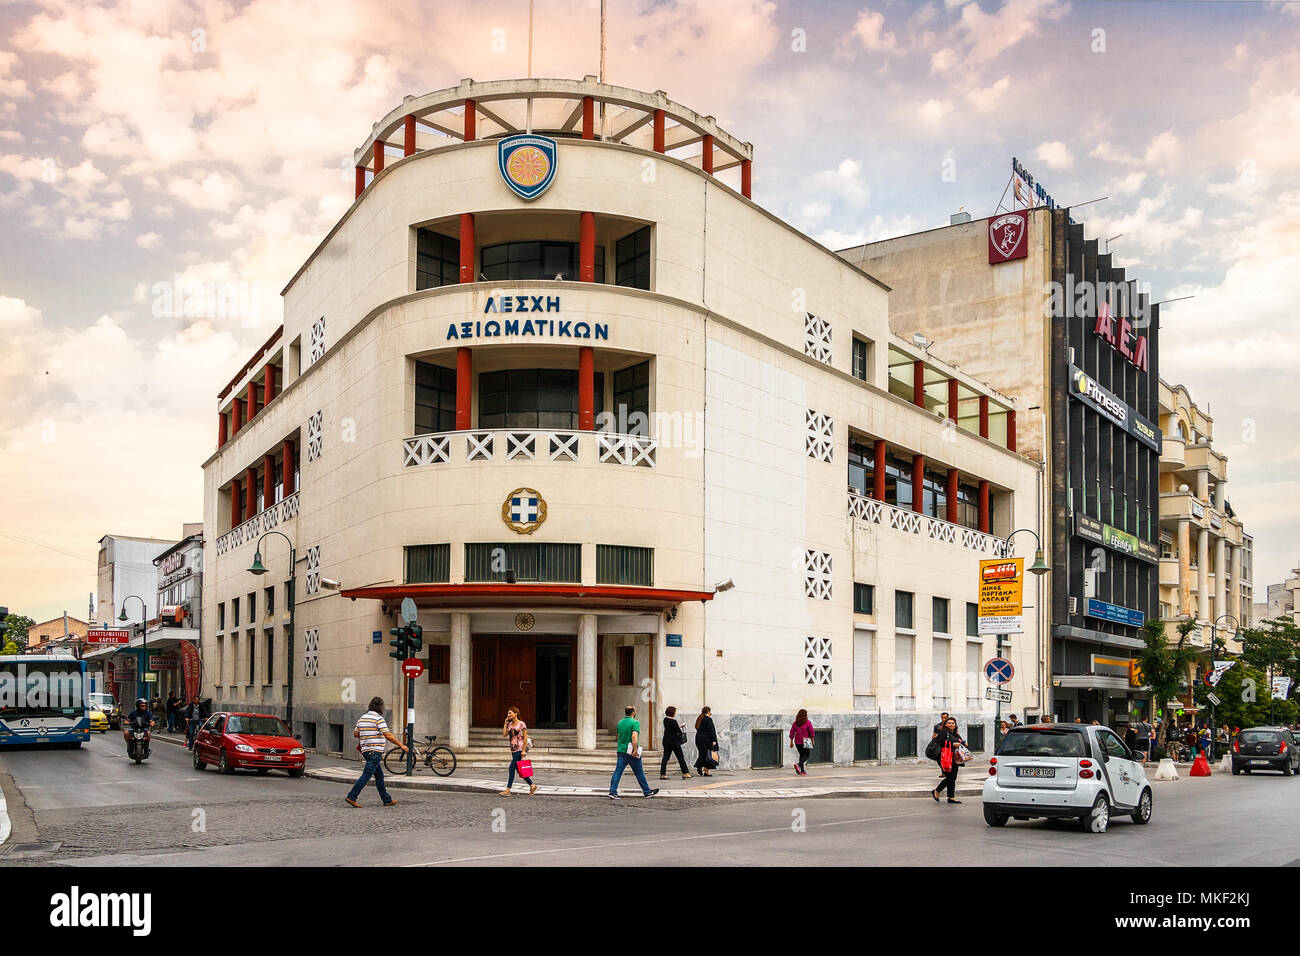 Larissa, Thessaly, Greece - May 4th, 2018: Facade of the Officers Club ( Leschi Axiomatikon) of the Greek land forces located in Kiprou street next to Stock Photo